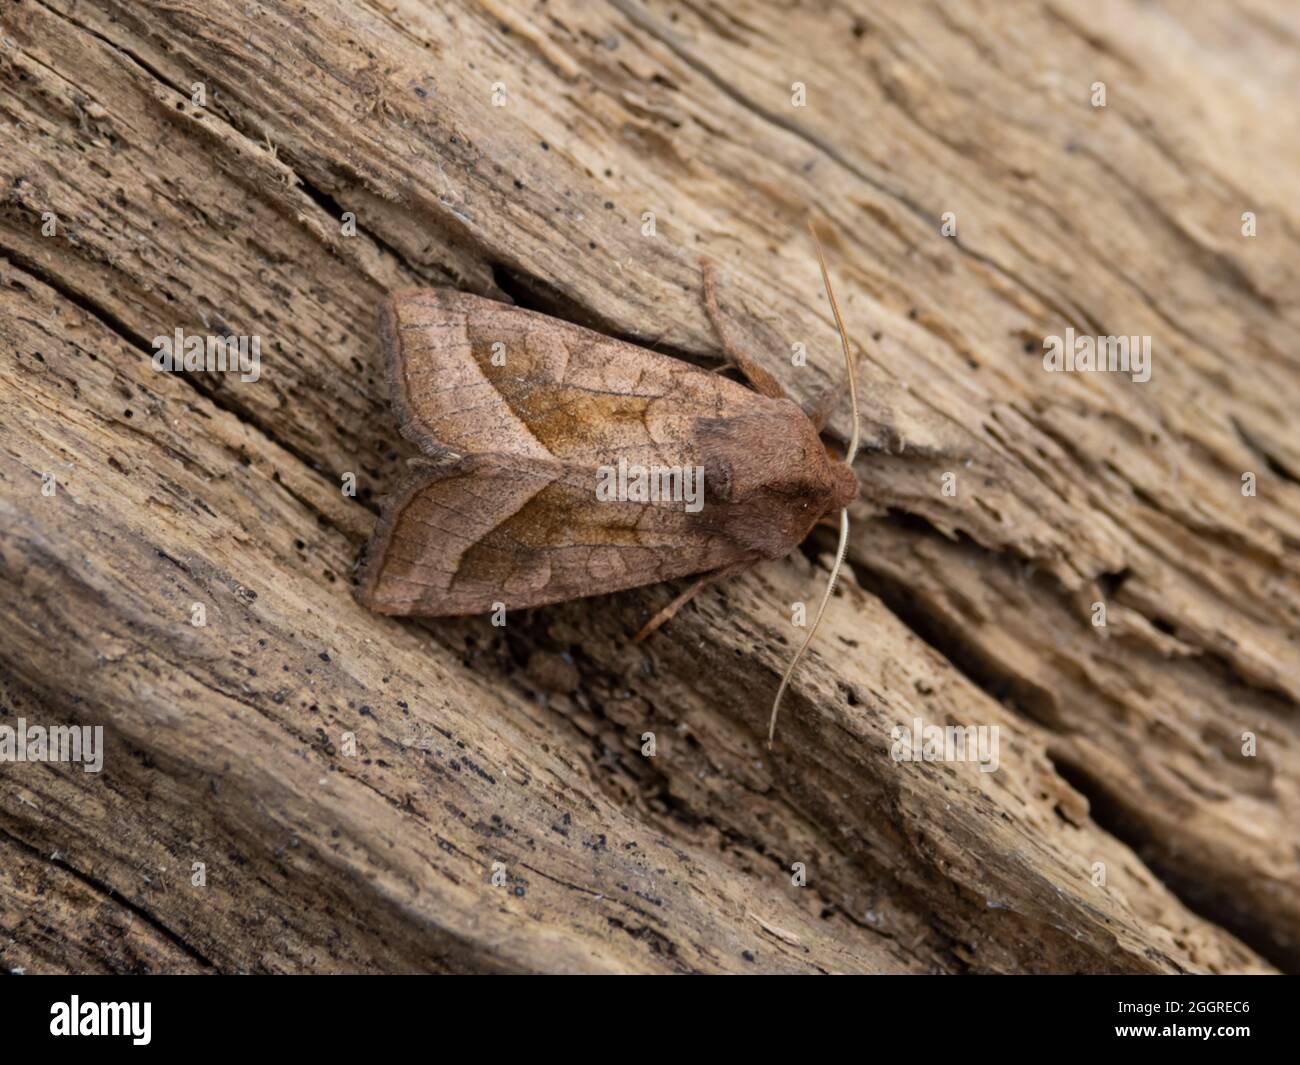 Hydraecia micacea, the Rosy Rustic Moth, perched on a log. Stock Photo